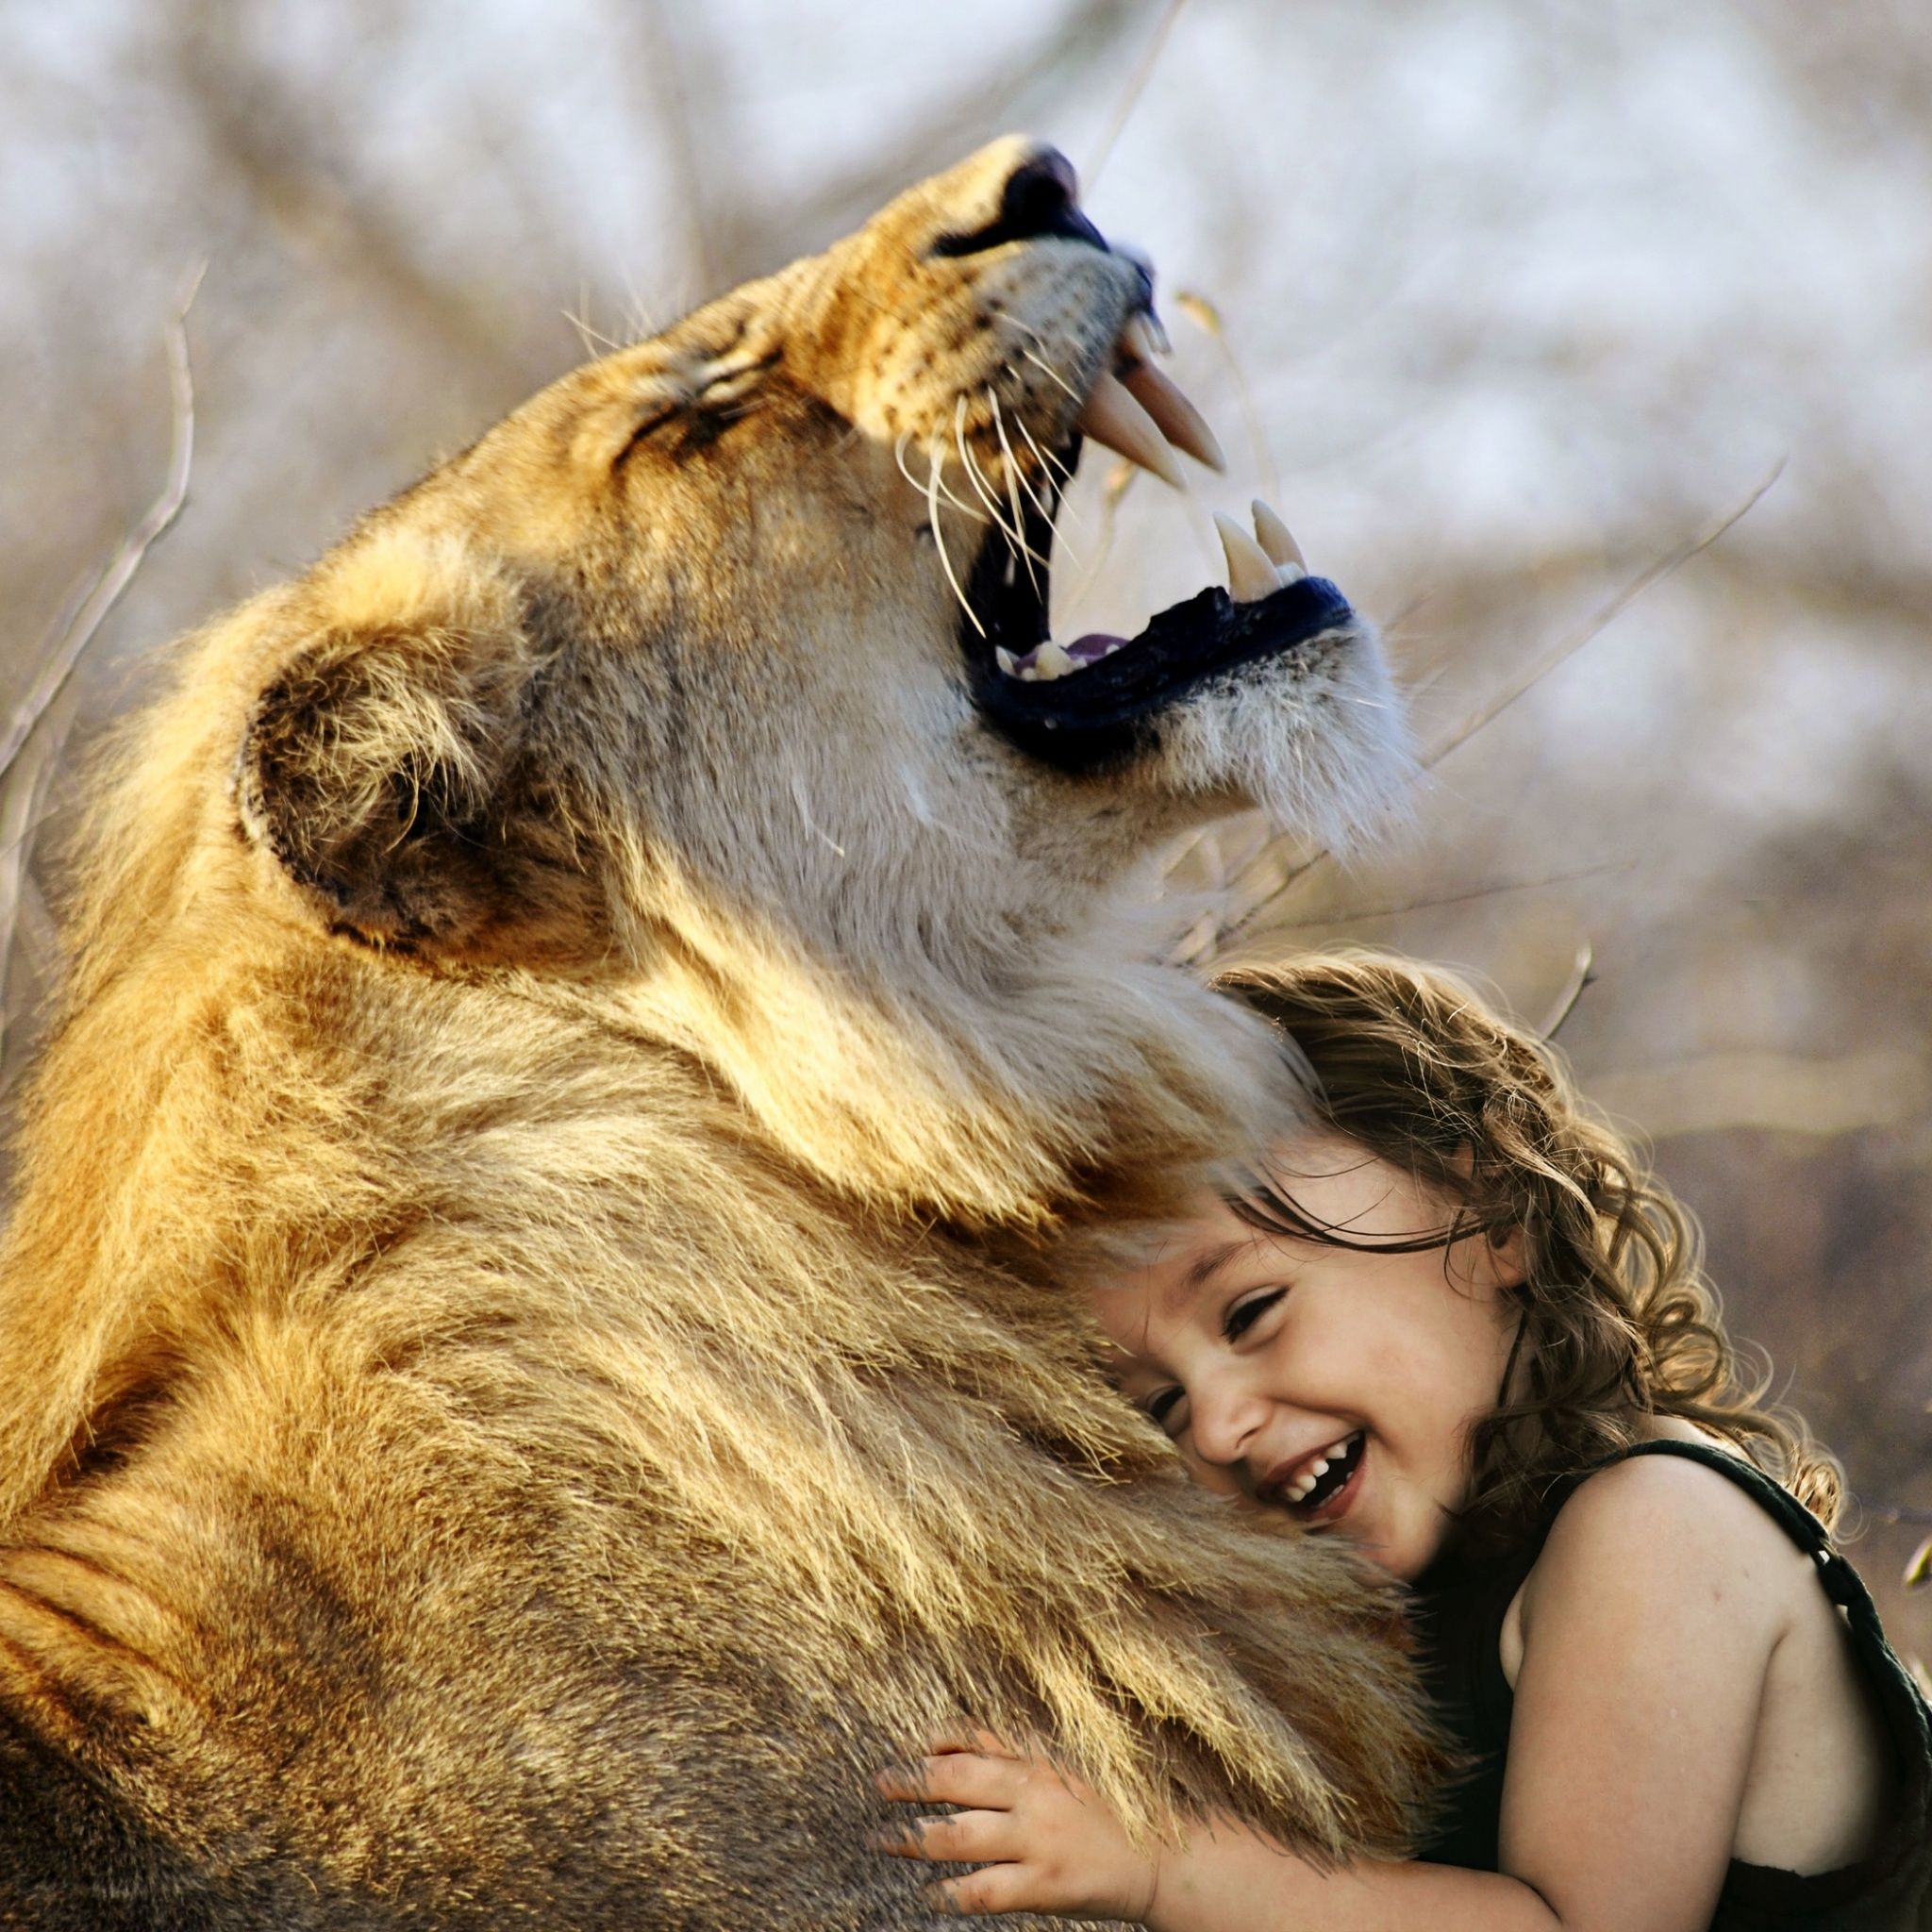 A young girl is playing with a lion. - Lion